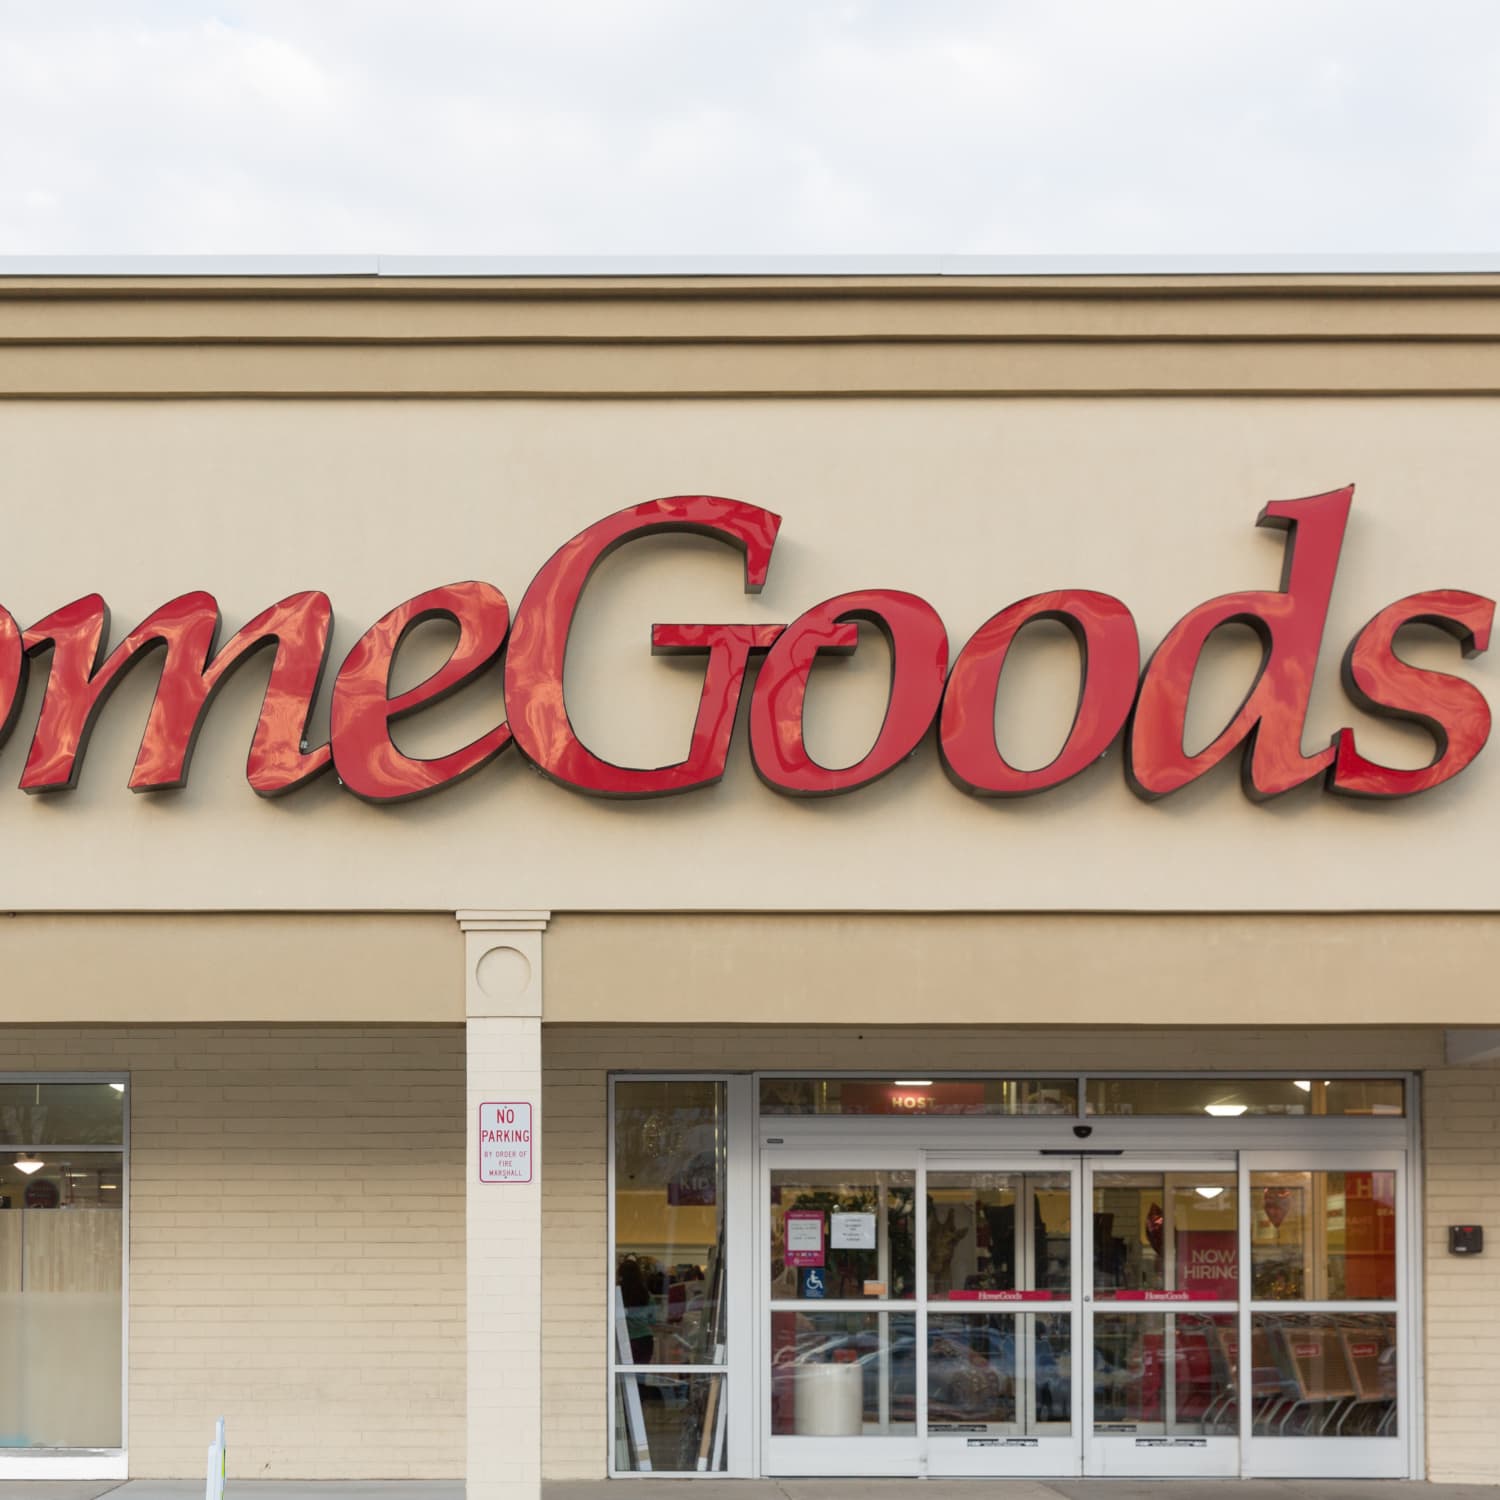 How to Get the Best Deals at HomeGoods: 11 Things You Should Know